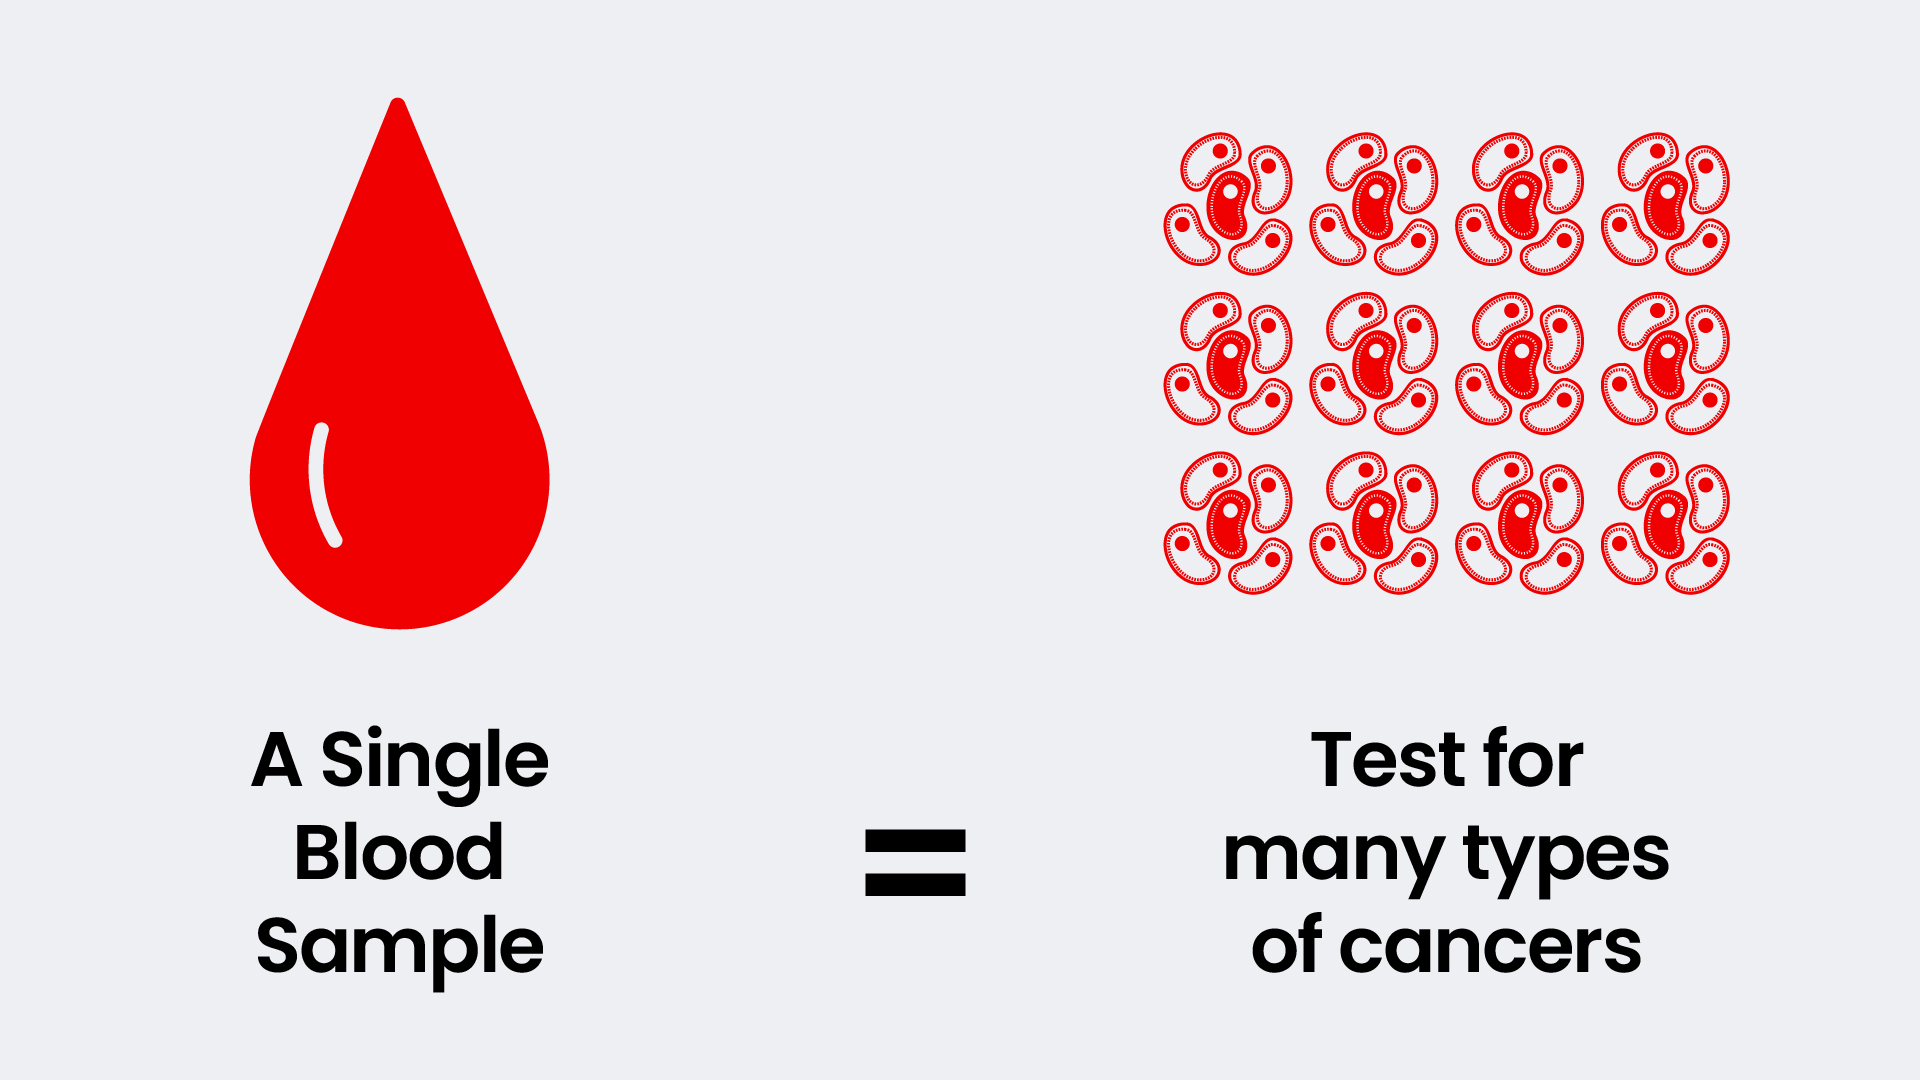 A simple blood sample equals a test for many types of cancers